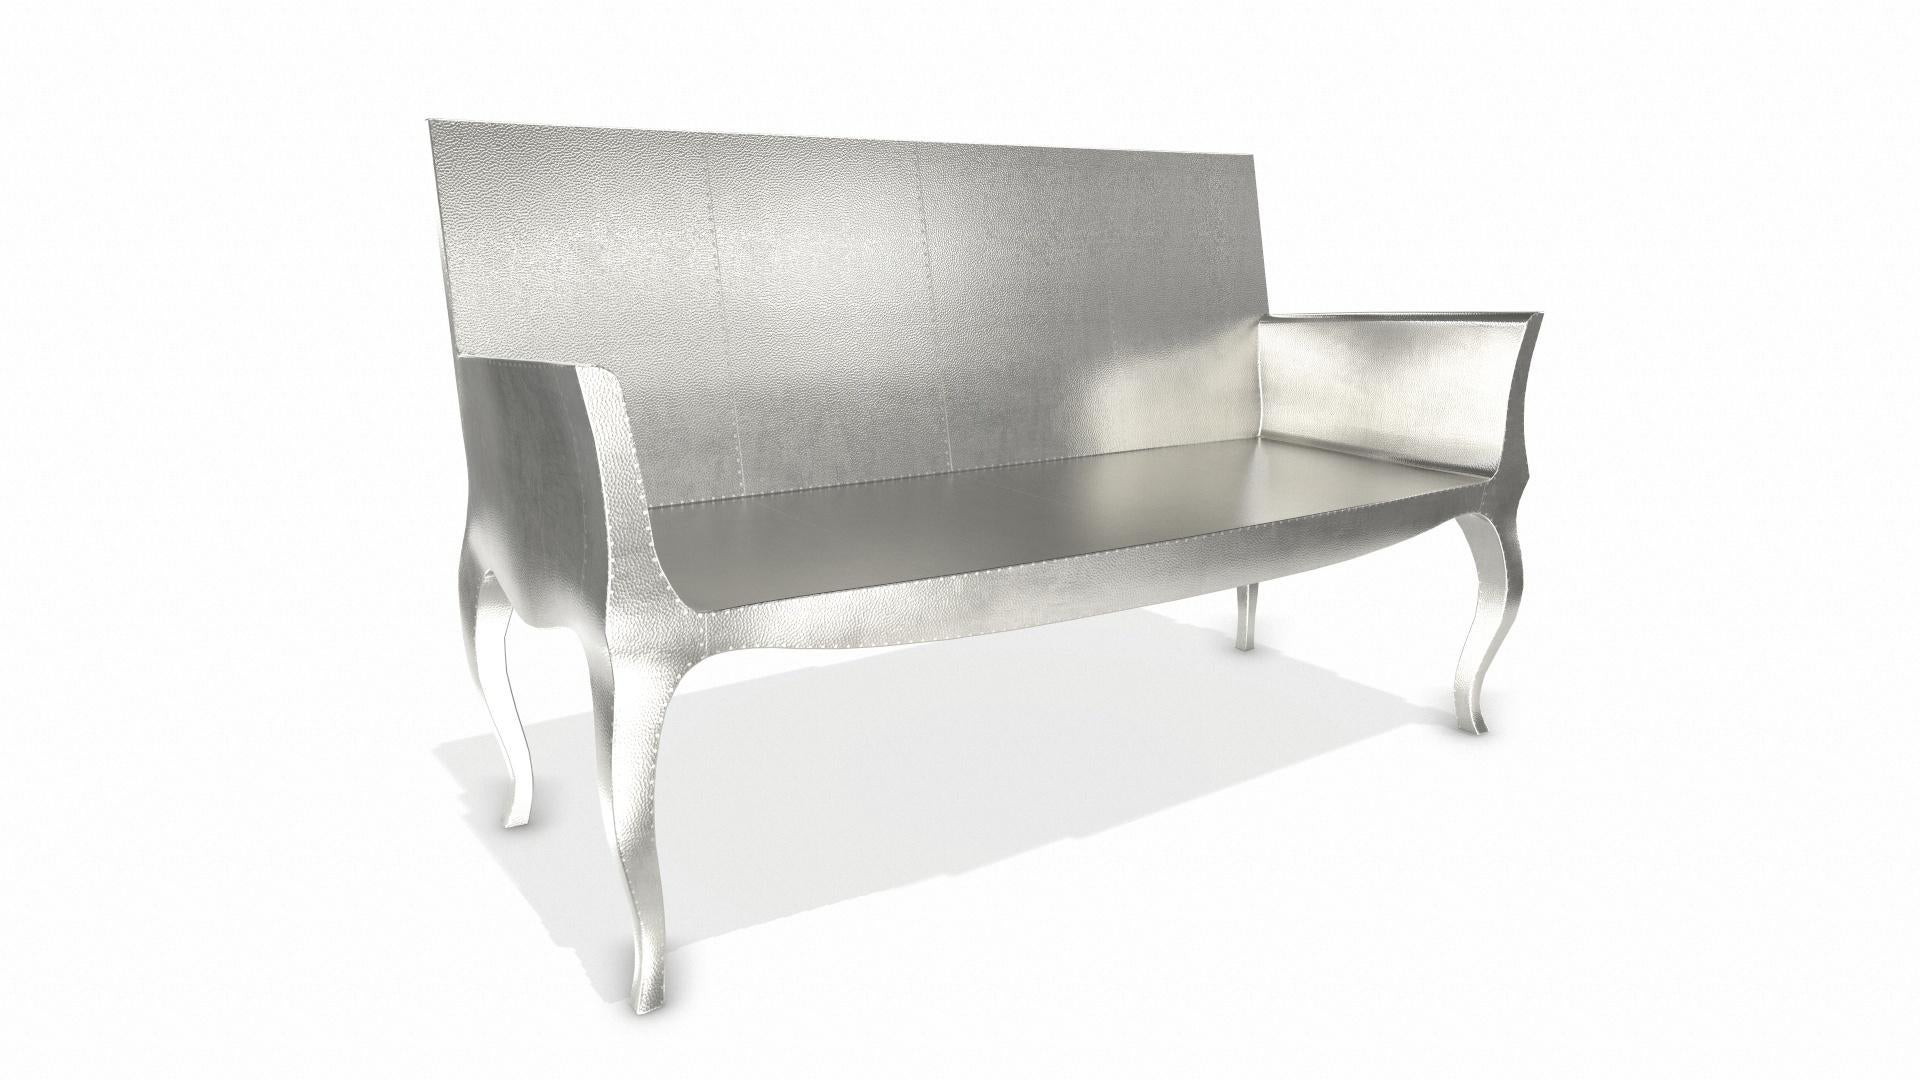 Contemporary Louise Settee Art Deco Loveseats in Mid. Hammered White Bronze by Paul Mathieu  For Sale